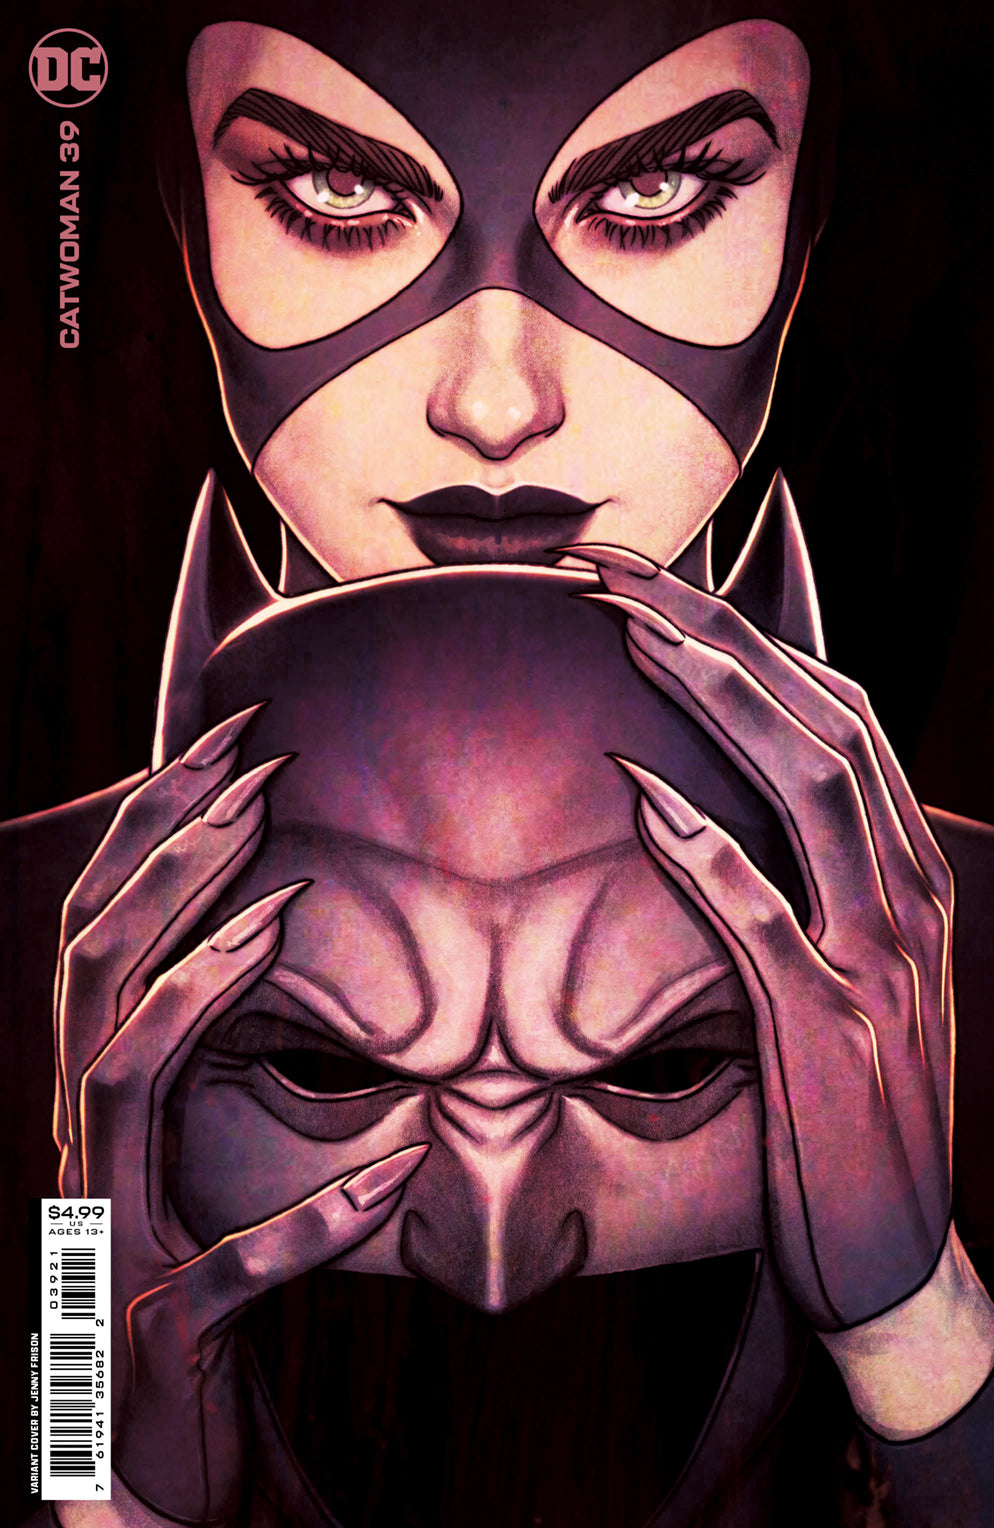 CATWOMAN #39